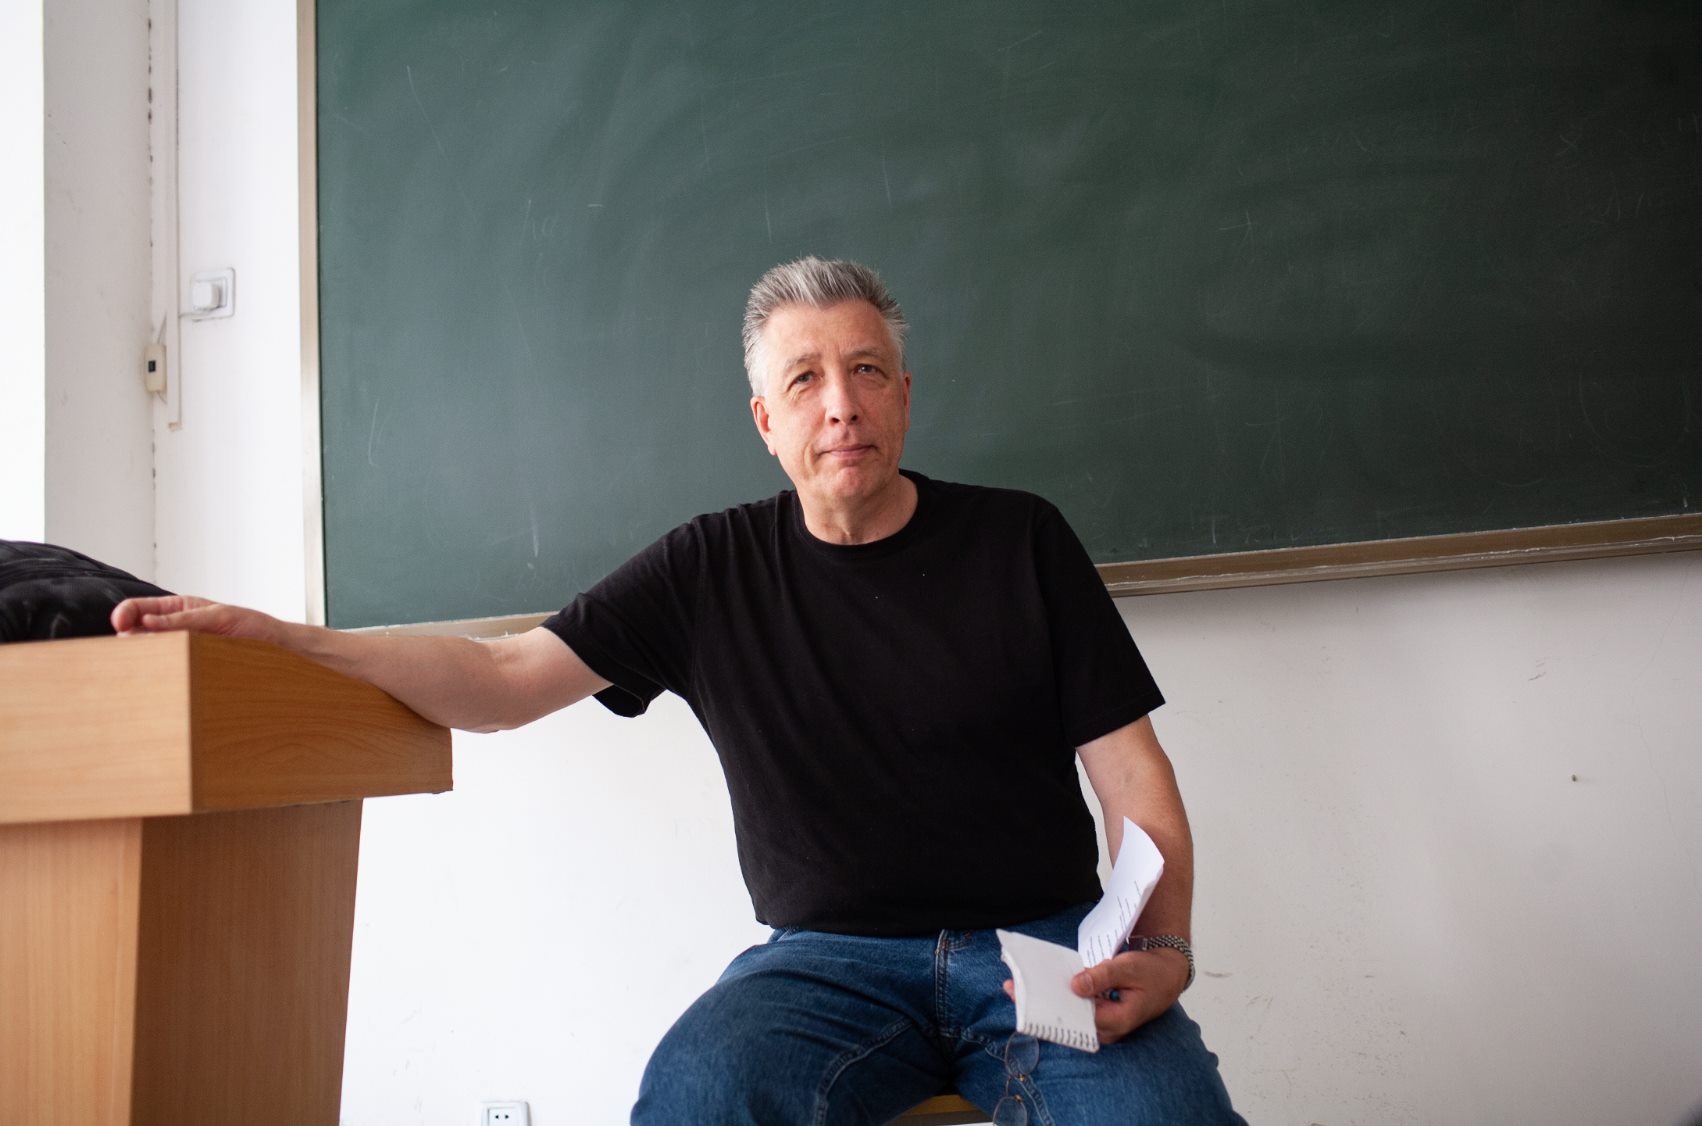 Tracy Dahlby sits in a classroom at a university in Shanghai during a Reporting China Maymester. Dahlby will retire from the School of Journalism and Media following the Spring 2022 semester.